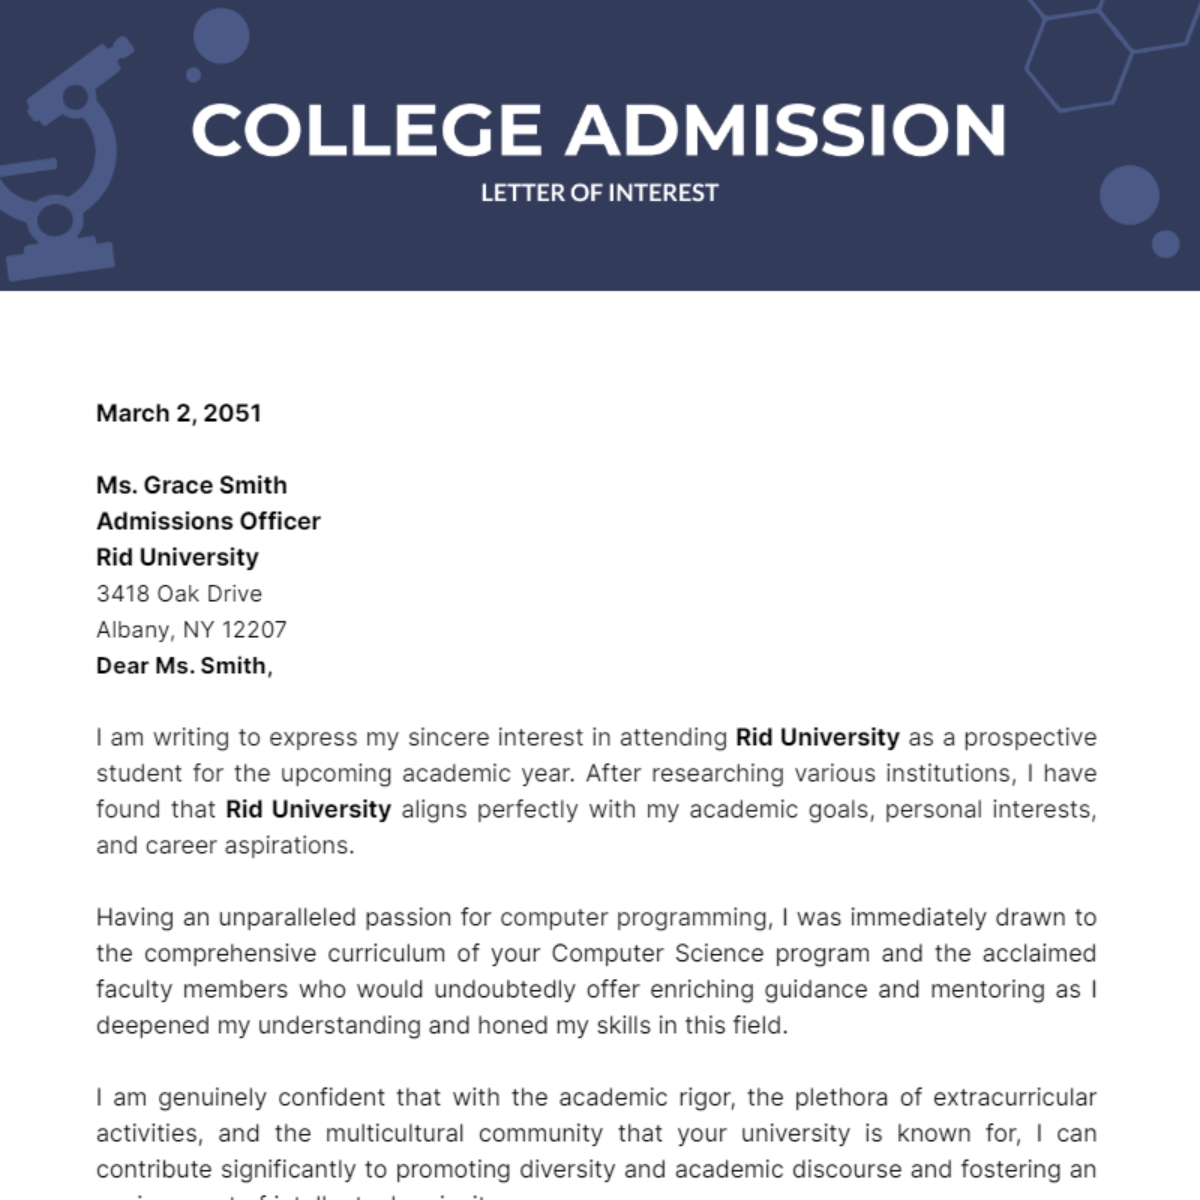 College Admission Letter of Interest Template